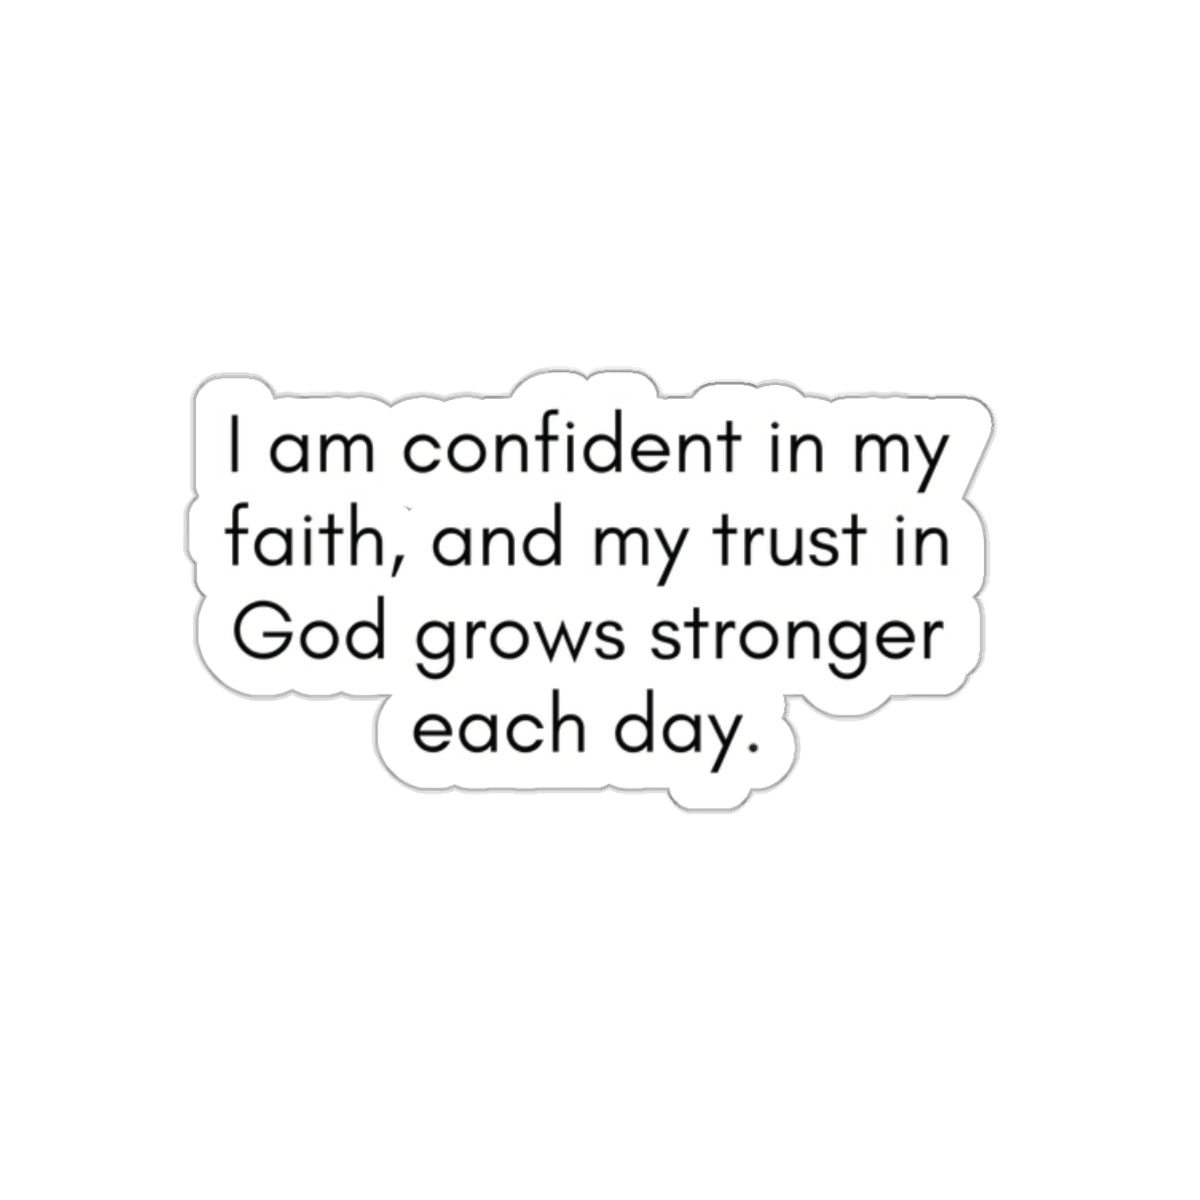 I Am Confident In My Faith... Inspirational Quote Kiss-Cut Stickers-Paper products-2" × 2"-White-mysticalcherry